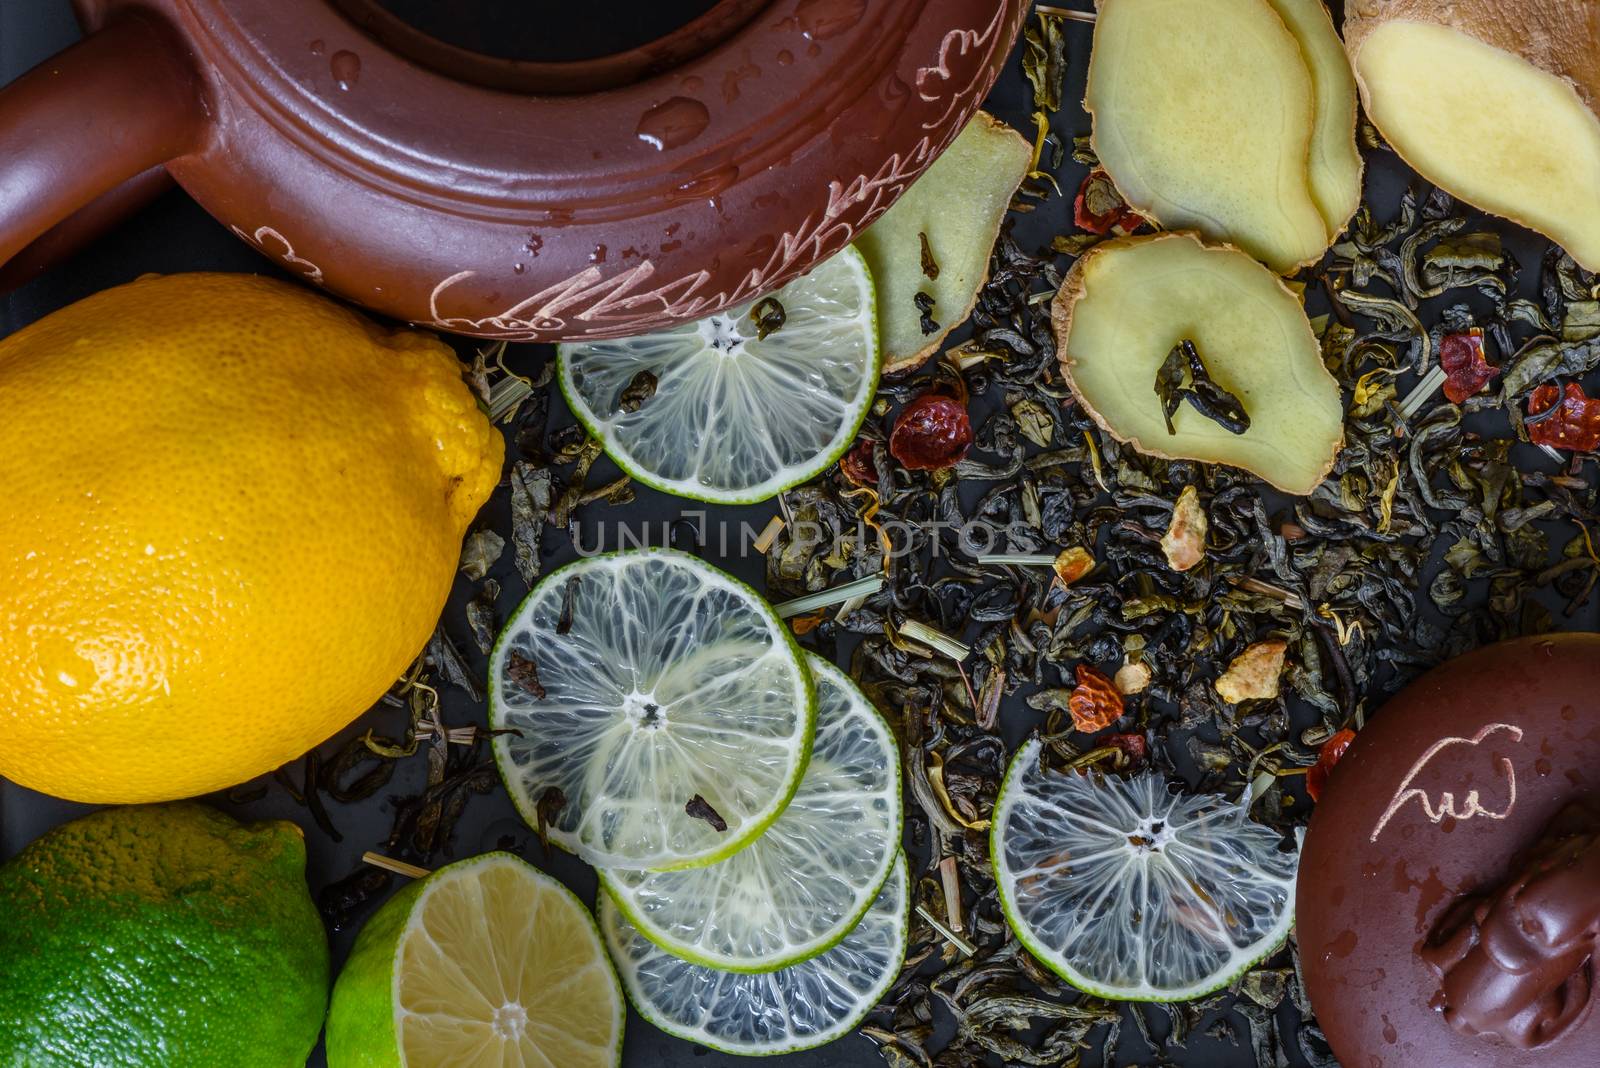 Teapot with ingredients for ginger tea beverage with lime recipe helpful for colds.